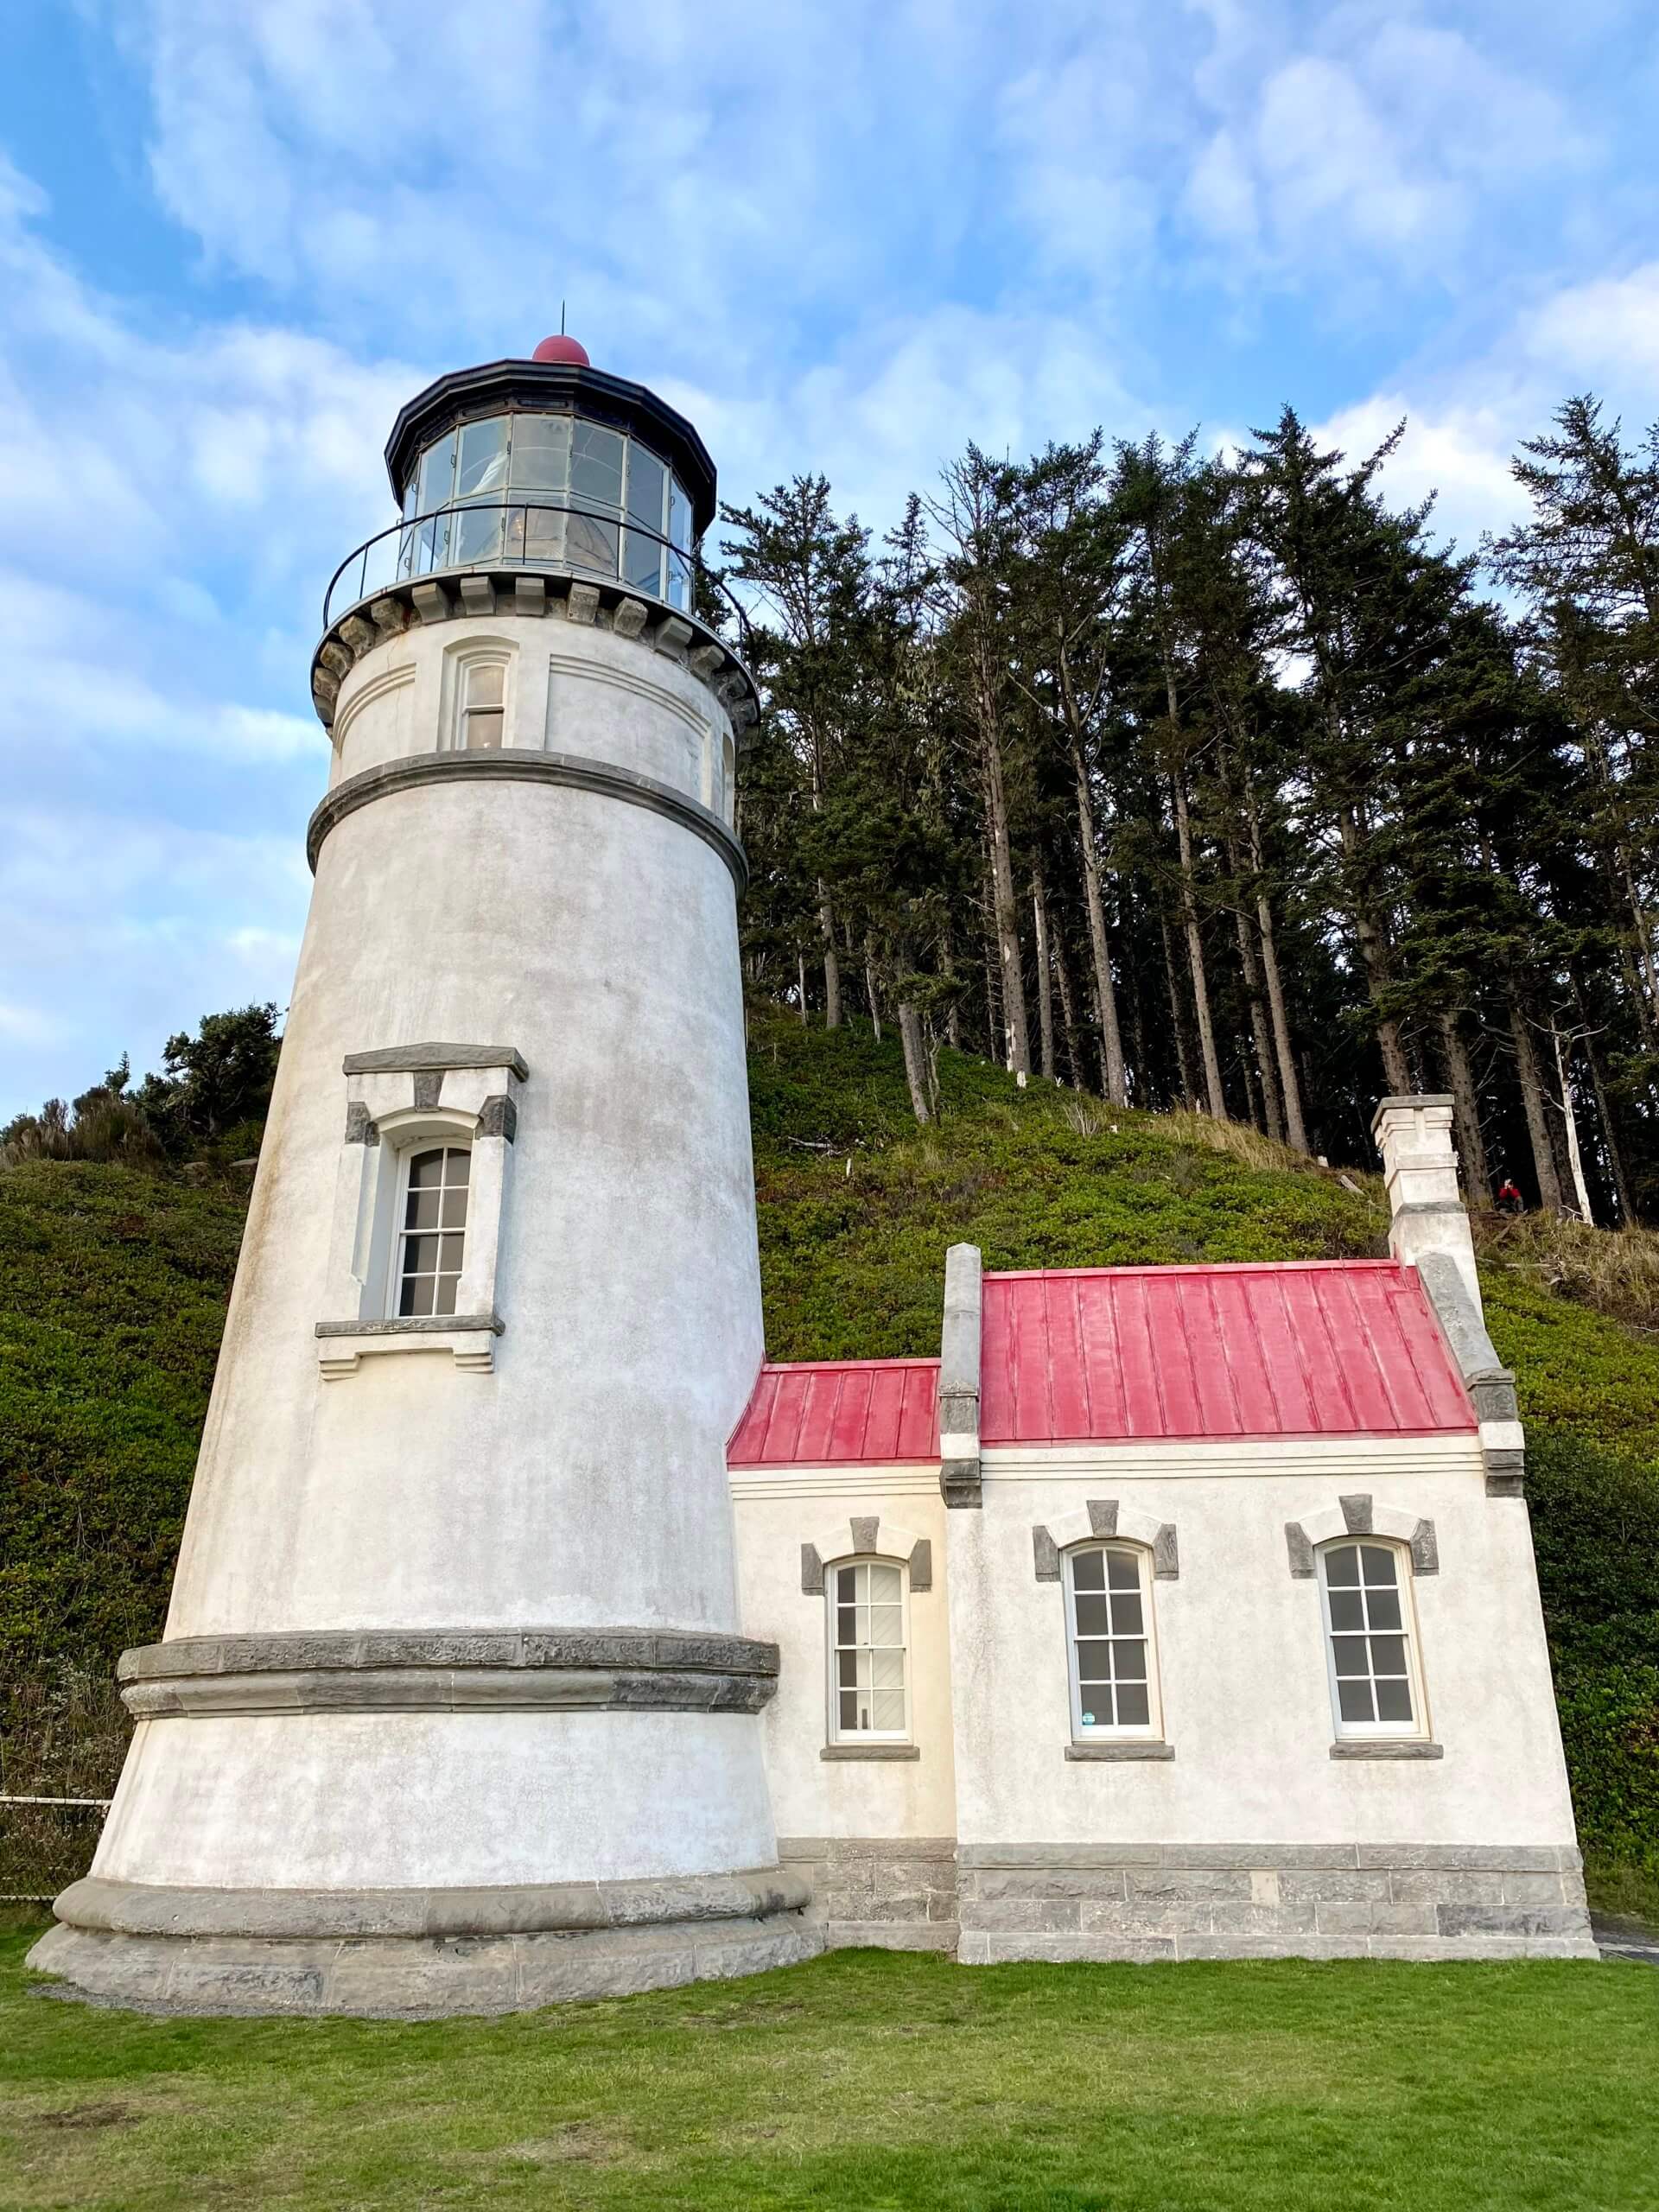 Heceta Head Lighthouse is iconic, with red metal roof and white scrubbed stucco exterior. The blue sky above has puffy clouds and the grass is a bright green.